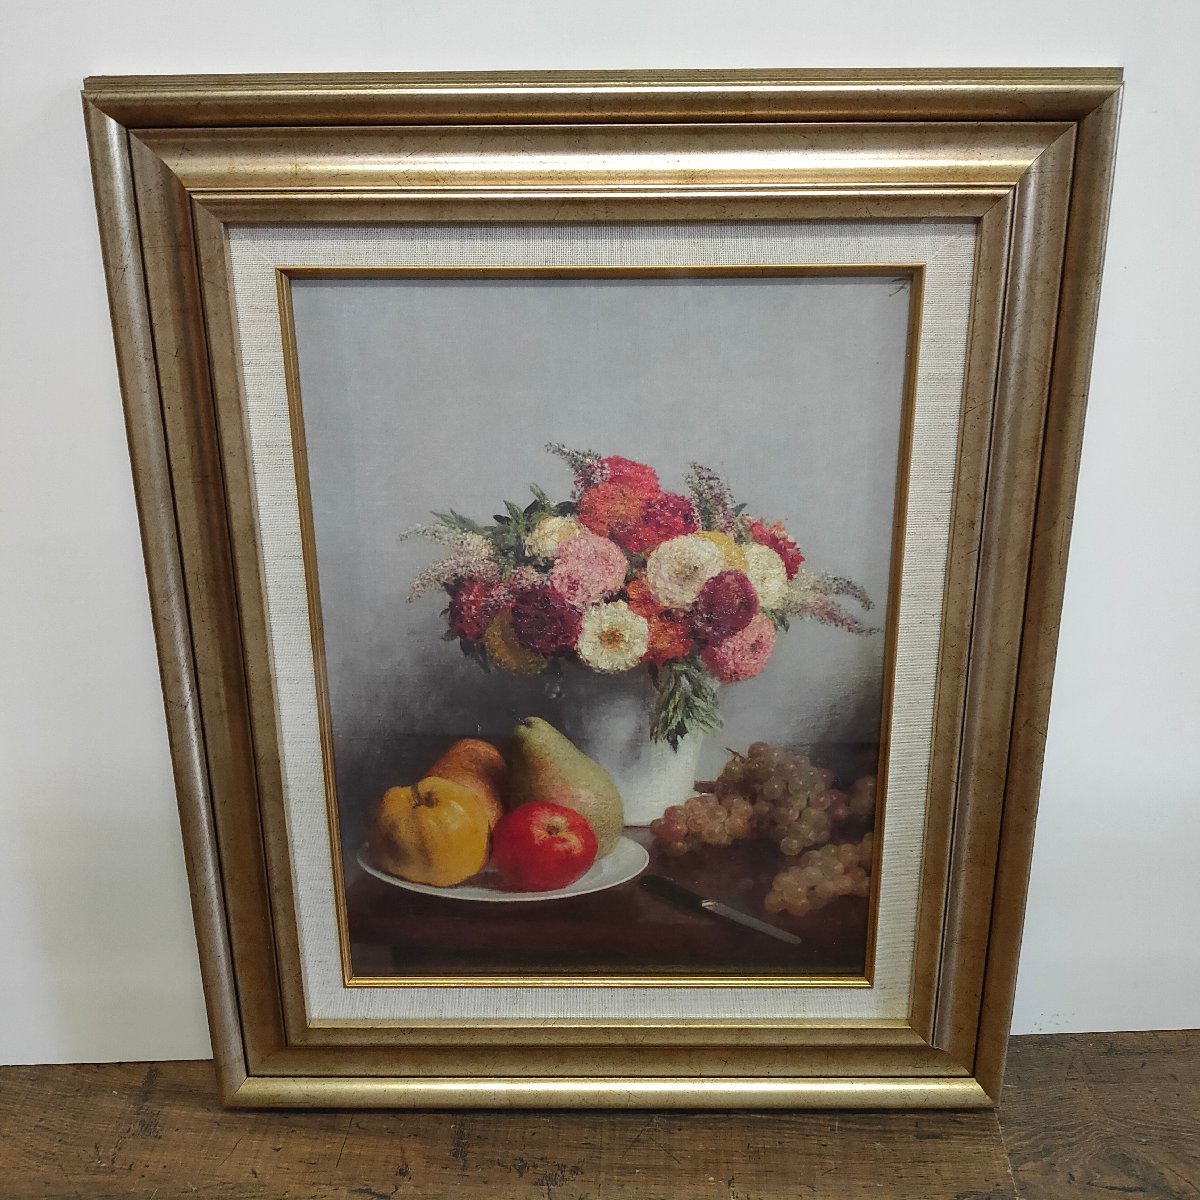 Latour Flowers and Fruits Reproduction Painting Height approx. 57.5cm x Width approx. 47.5cm A17/SR5, artwork, painting, others